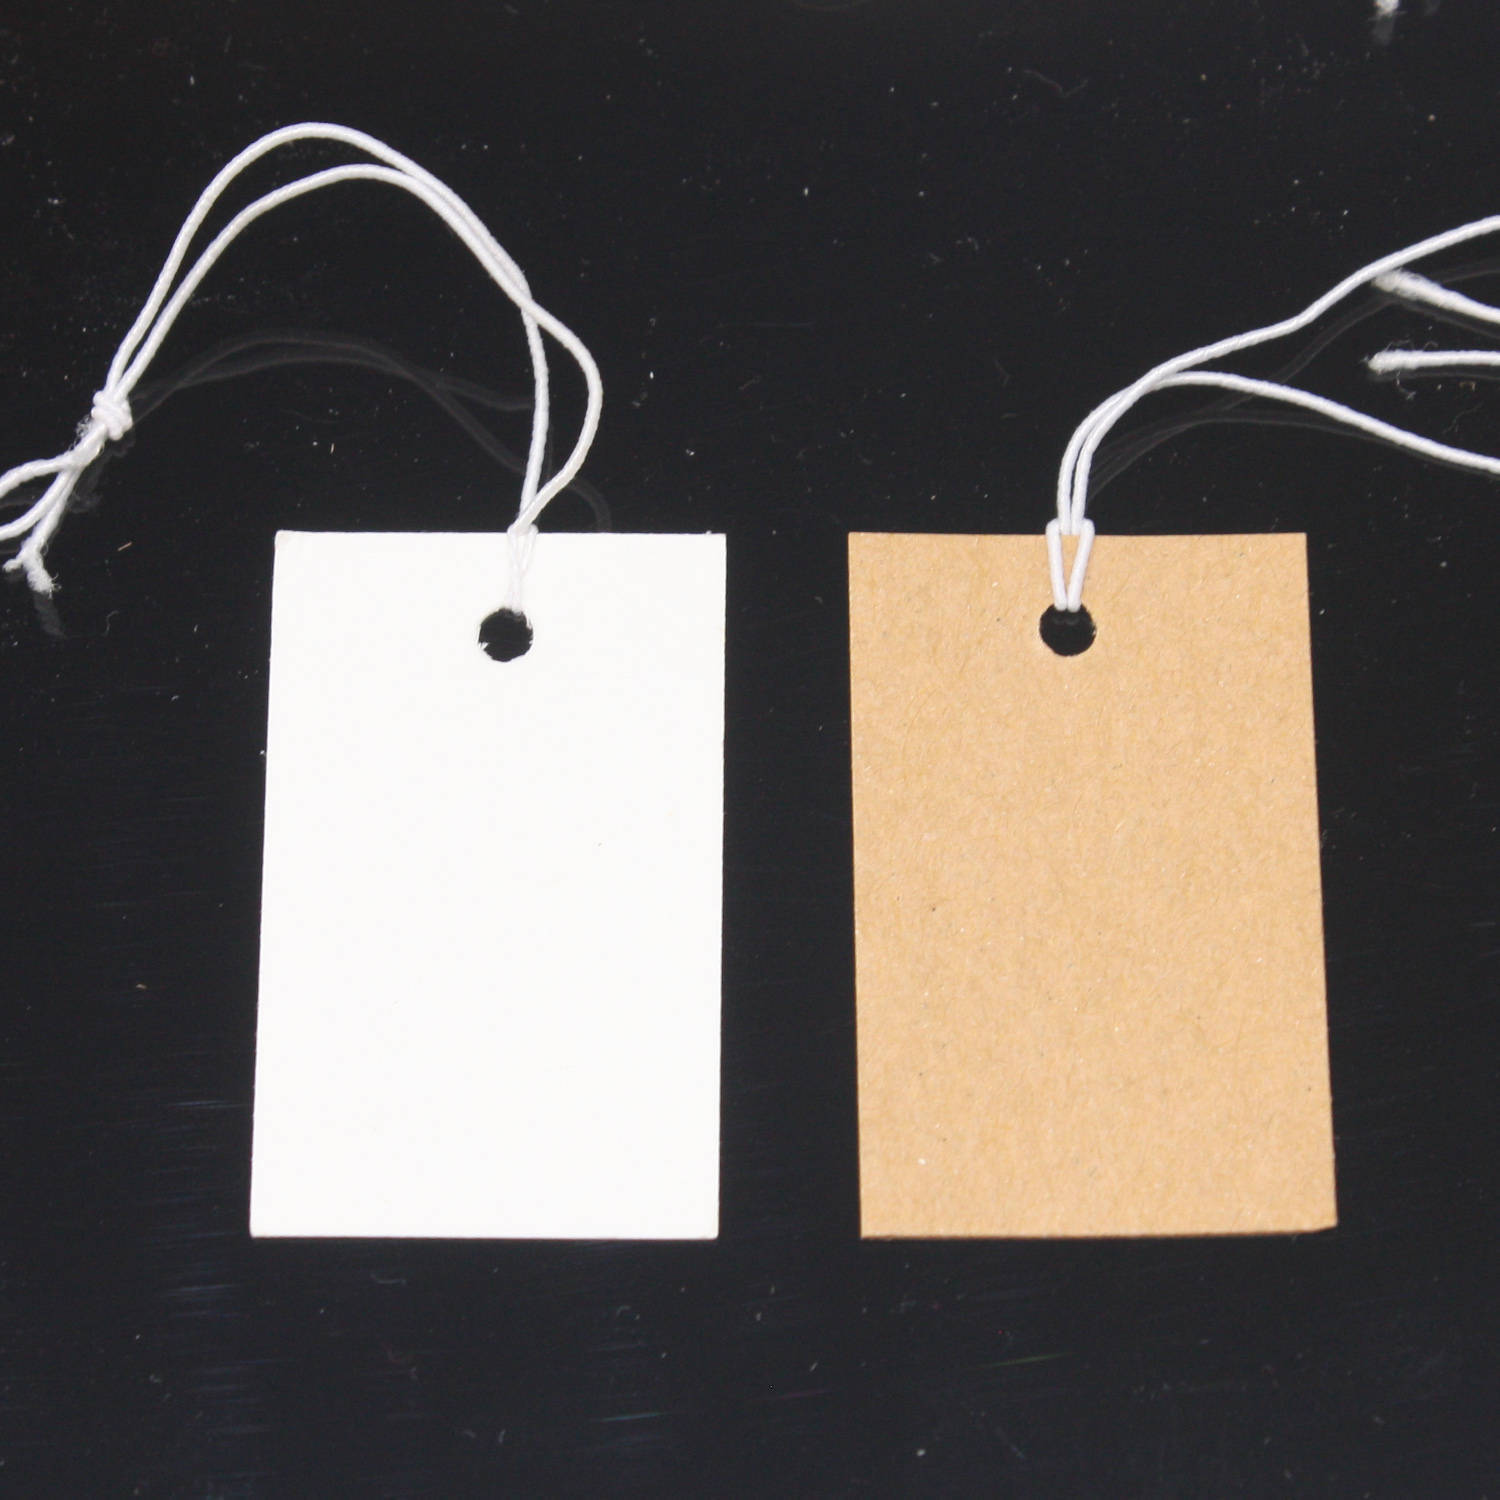 TOP QUALITY 'SALE WAS/NOW' PRICING TAGS 75MM X 120MM HANGER LABEL CARDS